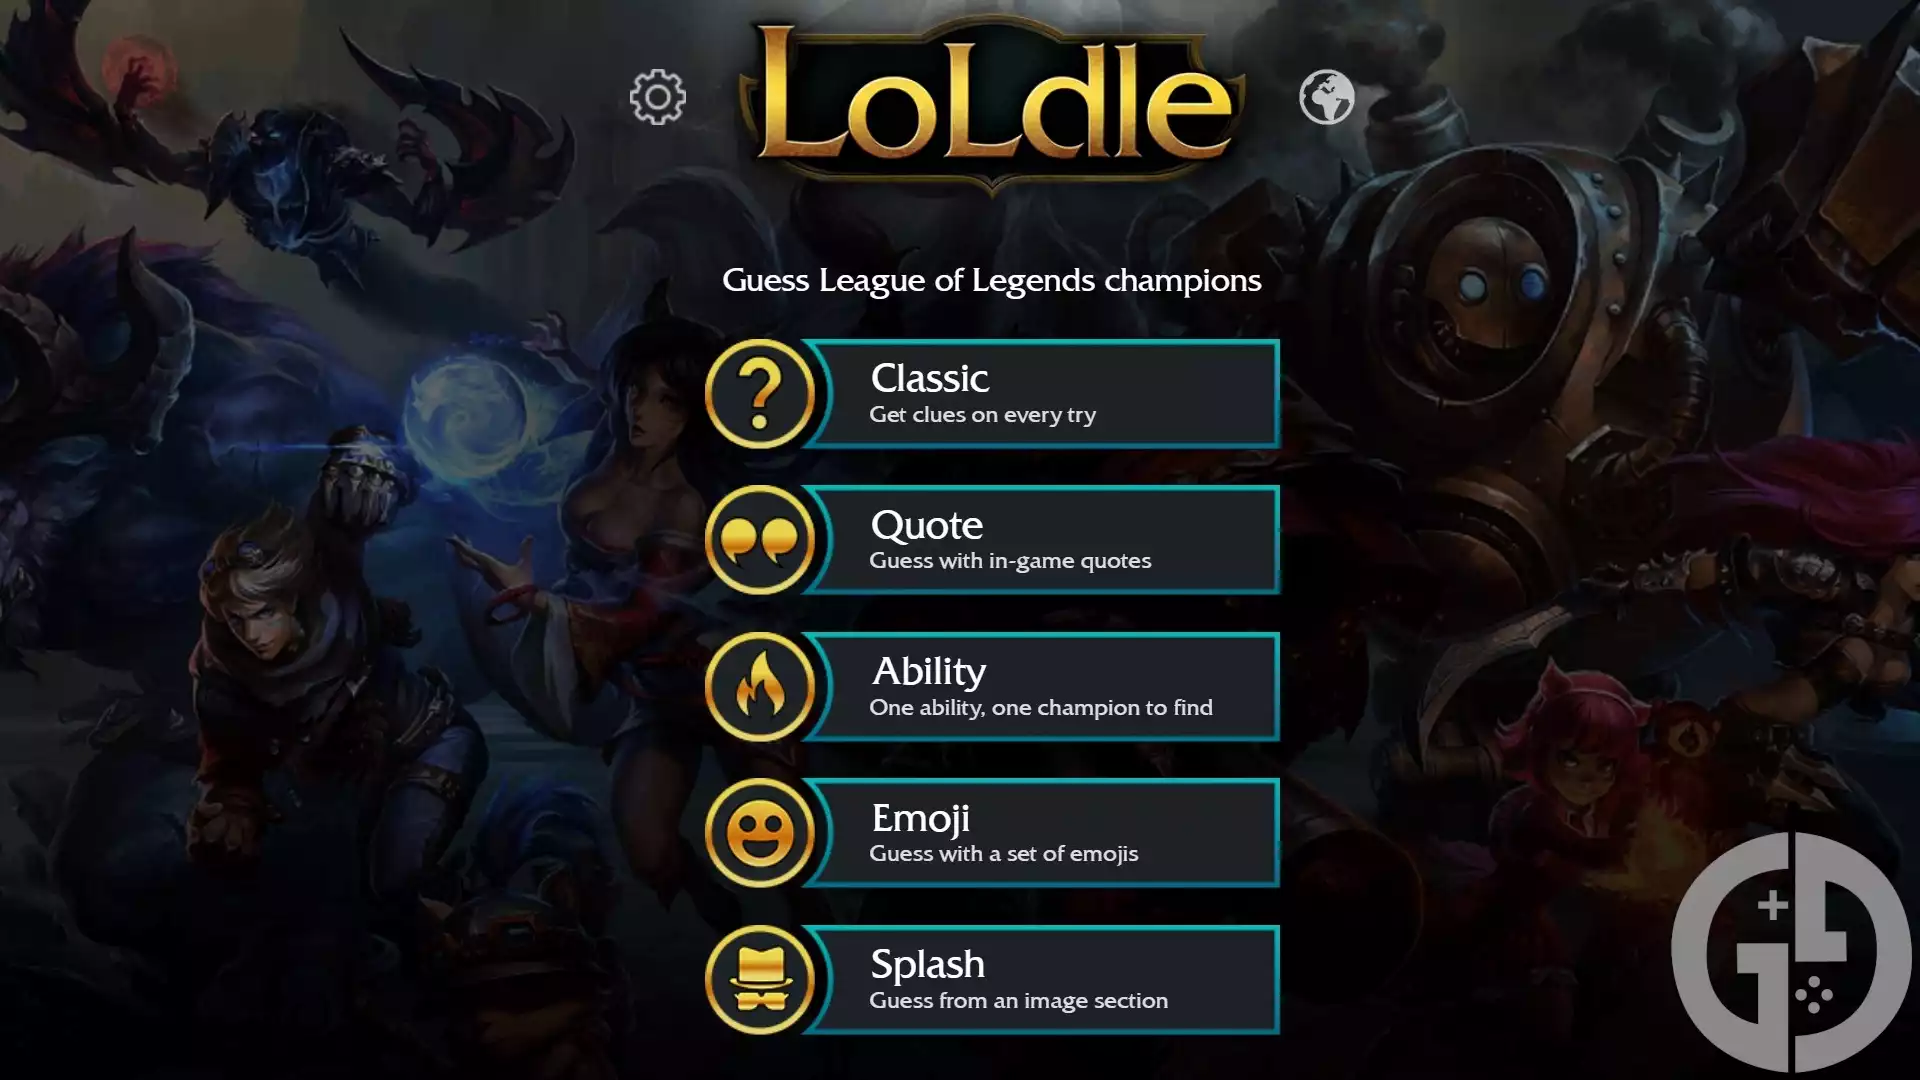 'LoLdle' answers for today, including Classic, Quote & more (April 26th)